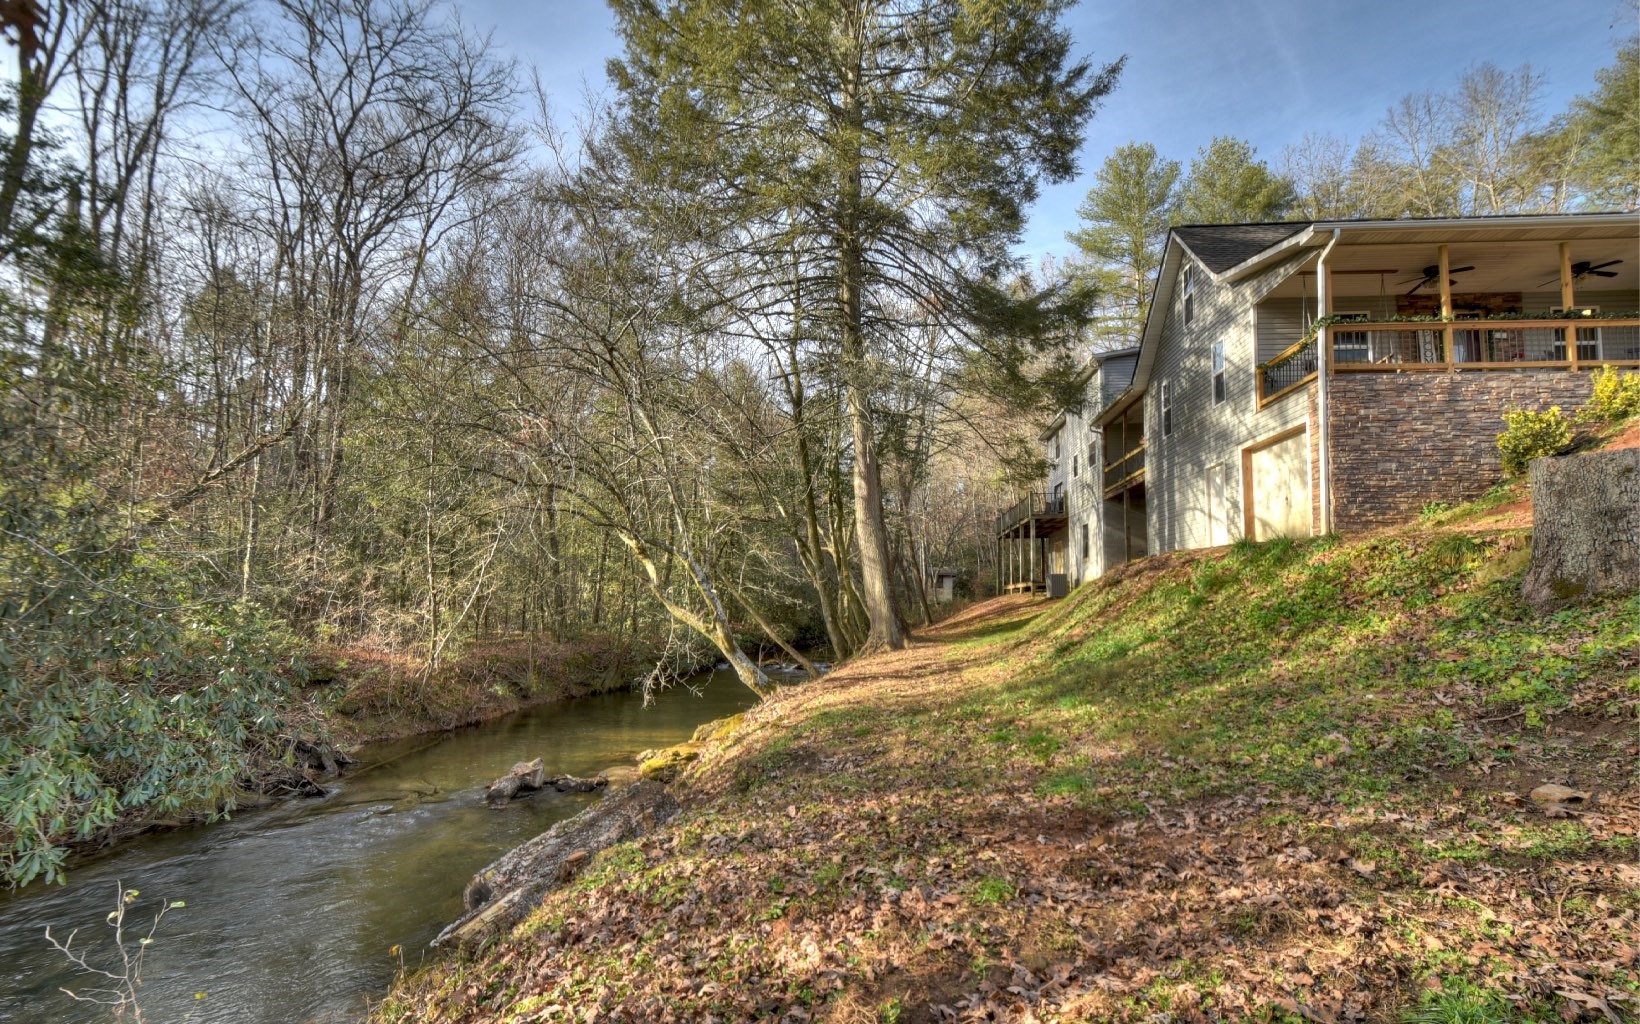 Creekfront! Traditional home with a touch of rustic flare perched above wide Ritchie Creek. Centrally located between Blue Ridge and McCaysville and easy access. Home offers cathedral ceilings, ample living space, large living room to accommodate the entire family, partially finished basement, multiple porches overlooking the creek that runs the length of the property, low maintenance vinyl and stone exterior, and plenty of outdoor area for gardening. Close to schools, medical facilities and downtown shopping!